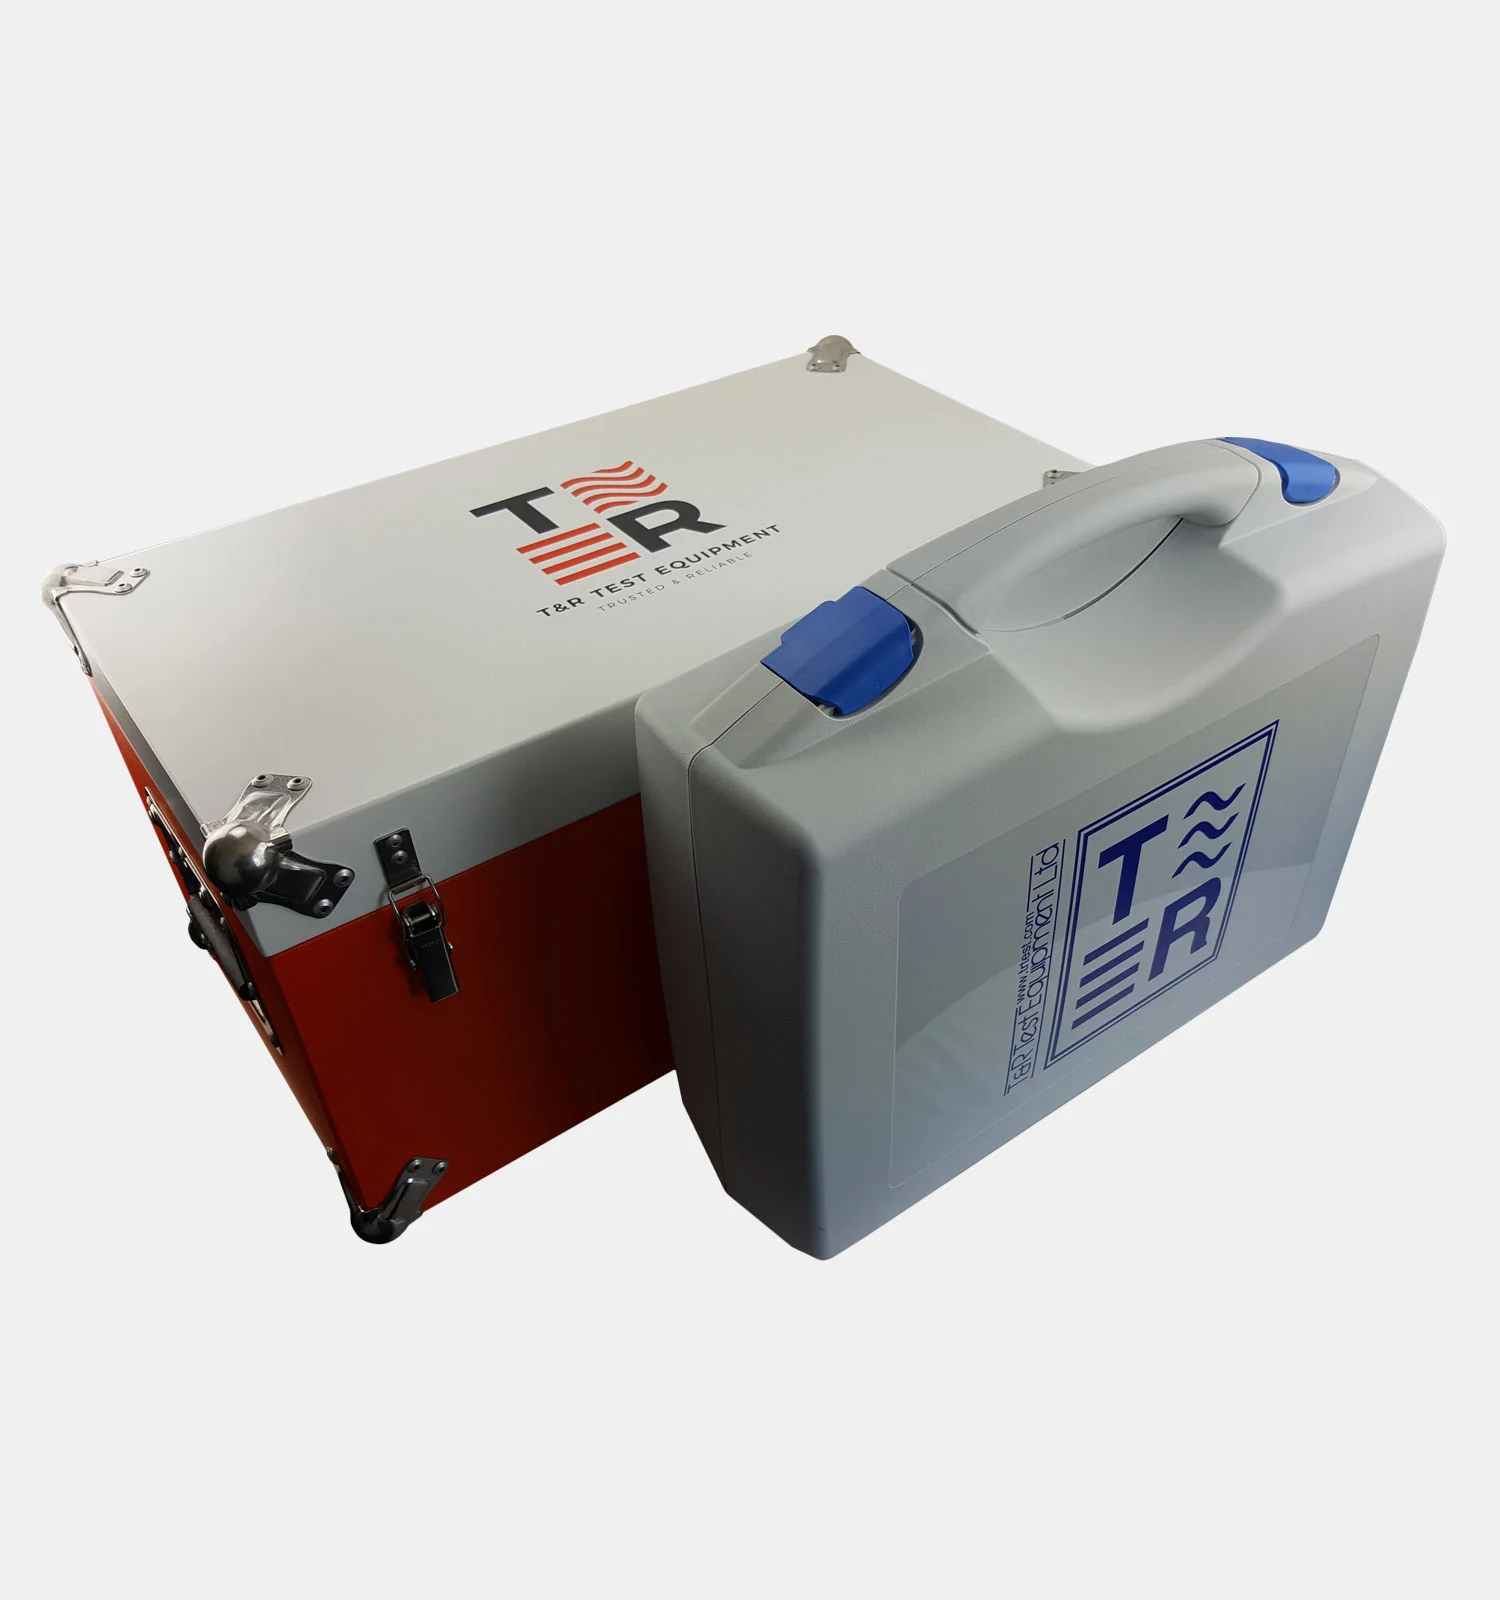 Suppliers of 200A-3PH MK3 Secondary Current Injection Test Set